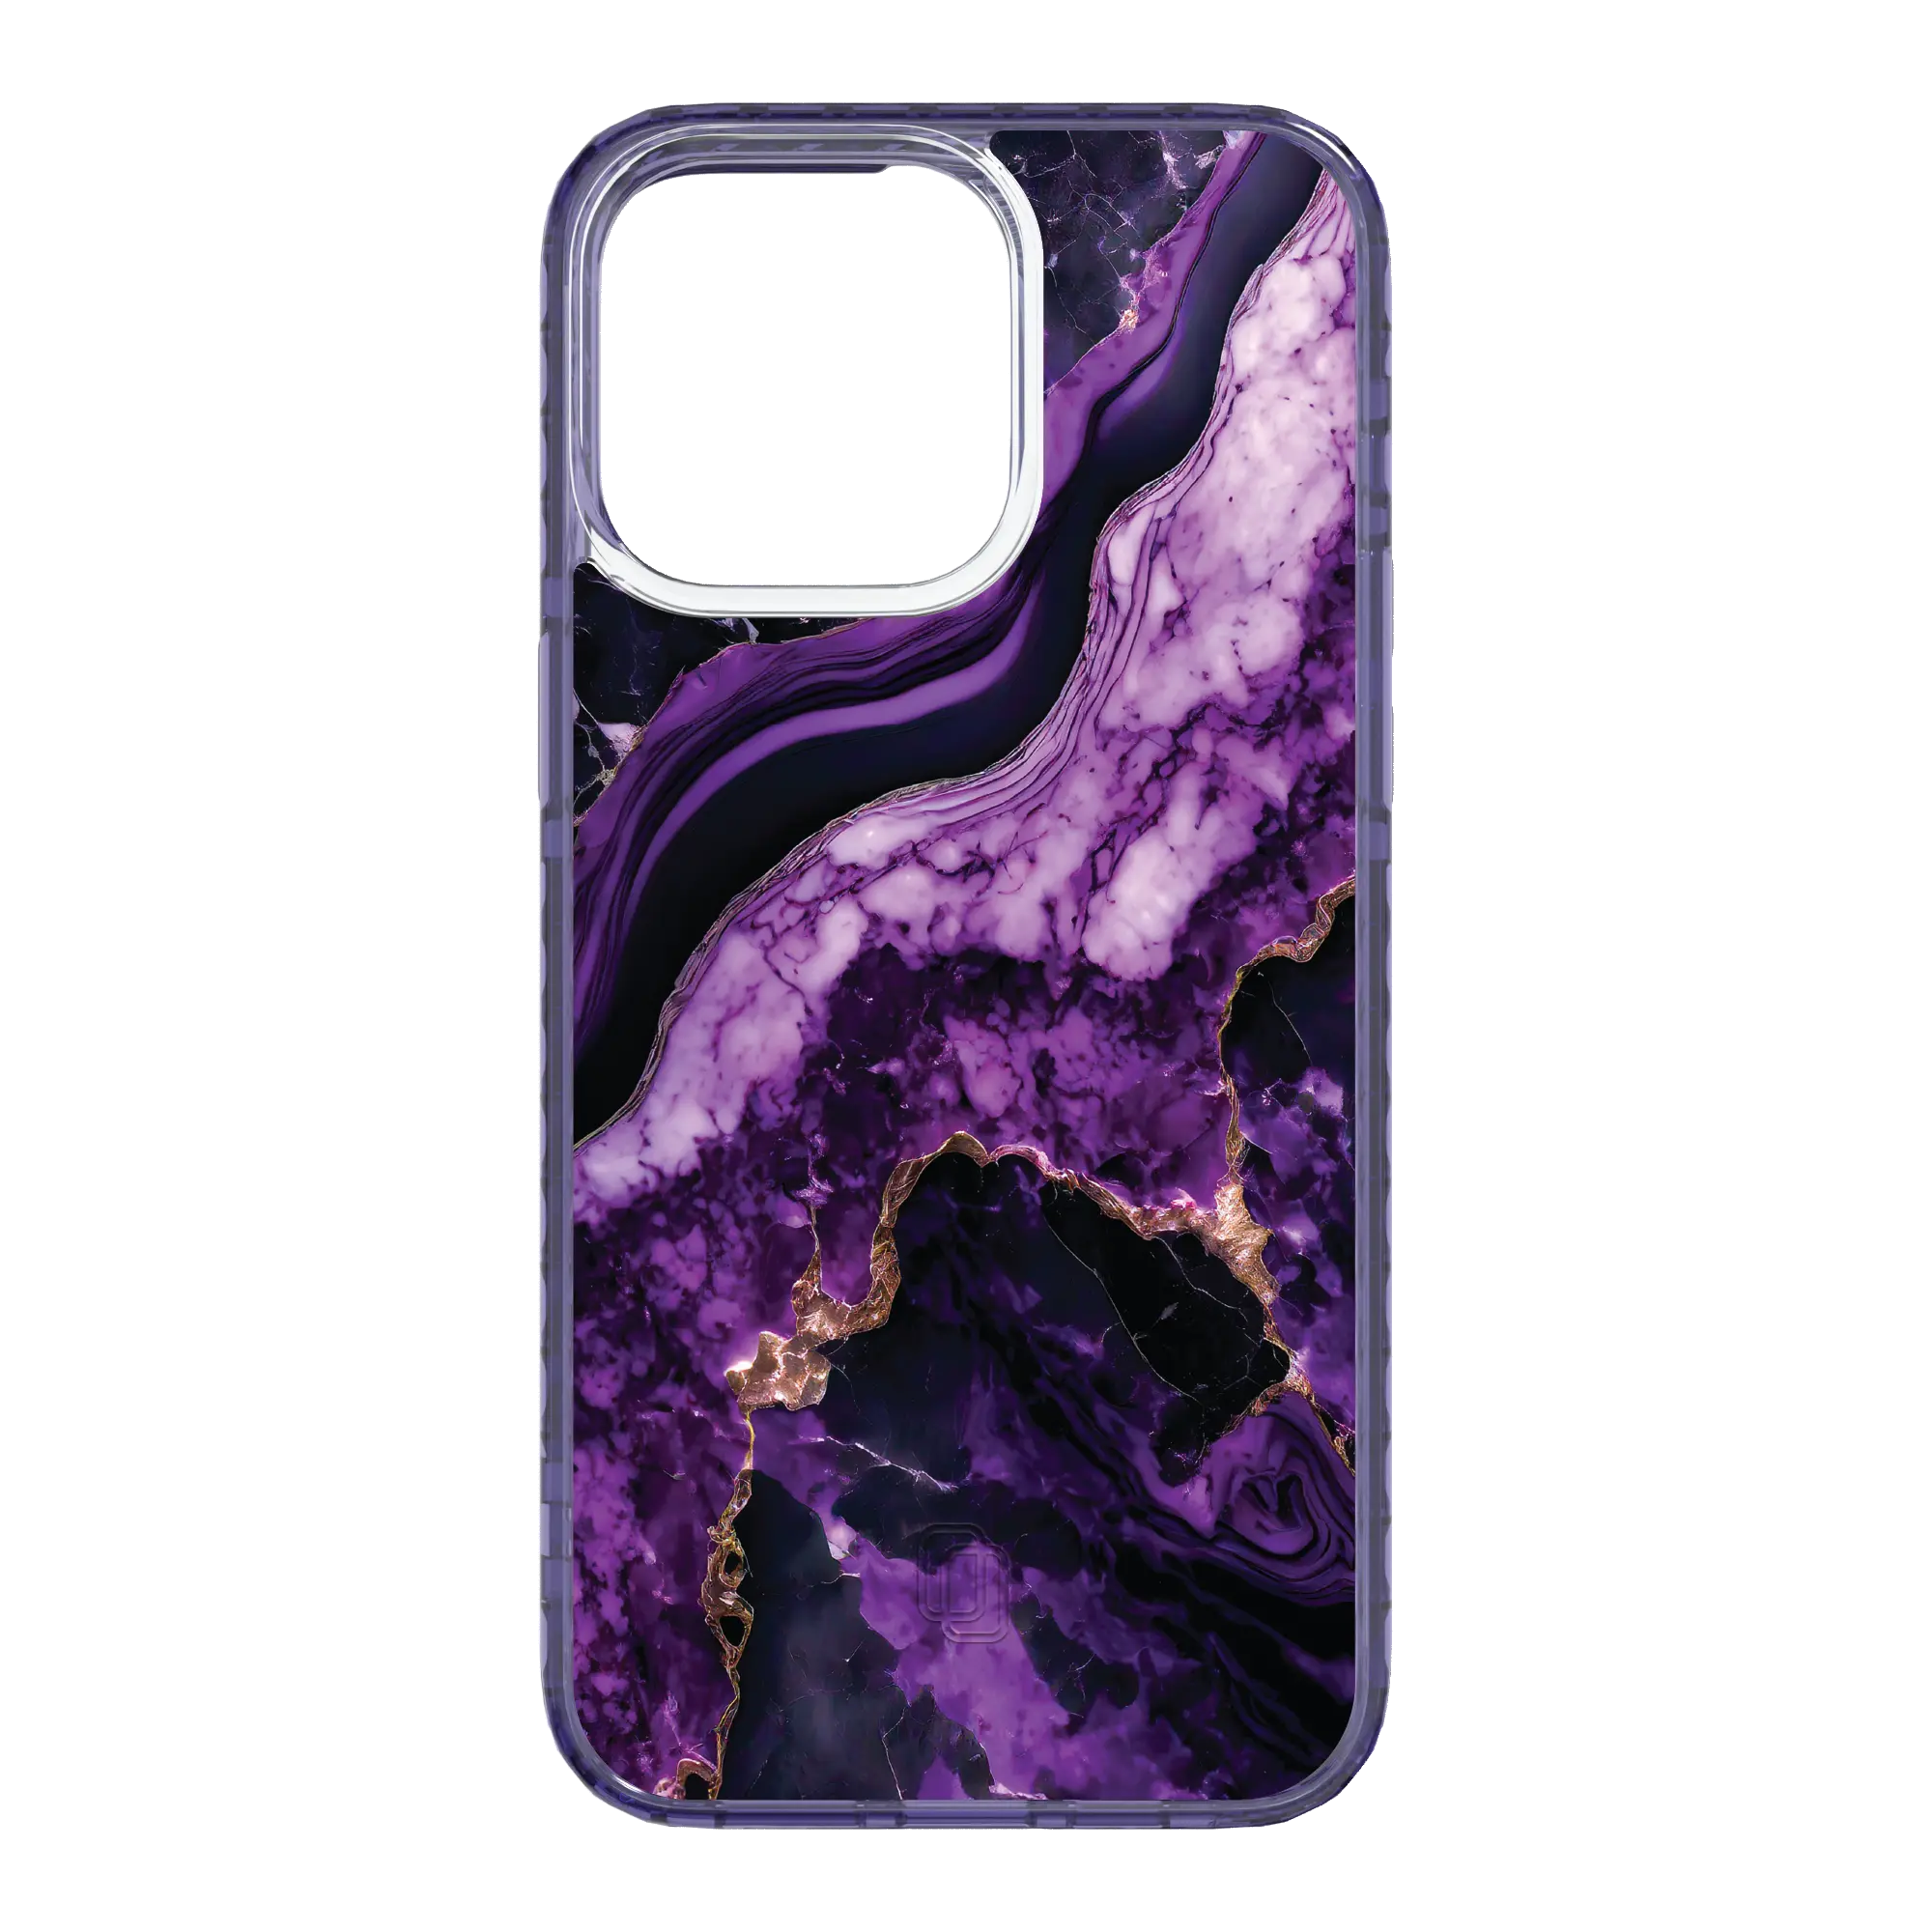 Apple-iPhone-15-Pro-Max-Midnight-Lilac Falling Dusk | Protective MagSafe Case | Marble Stone Series for Apple iPhone 15 Series cellhelmet cellhelmet